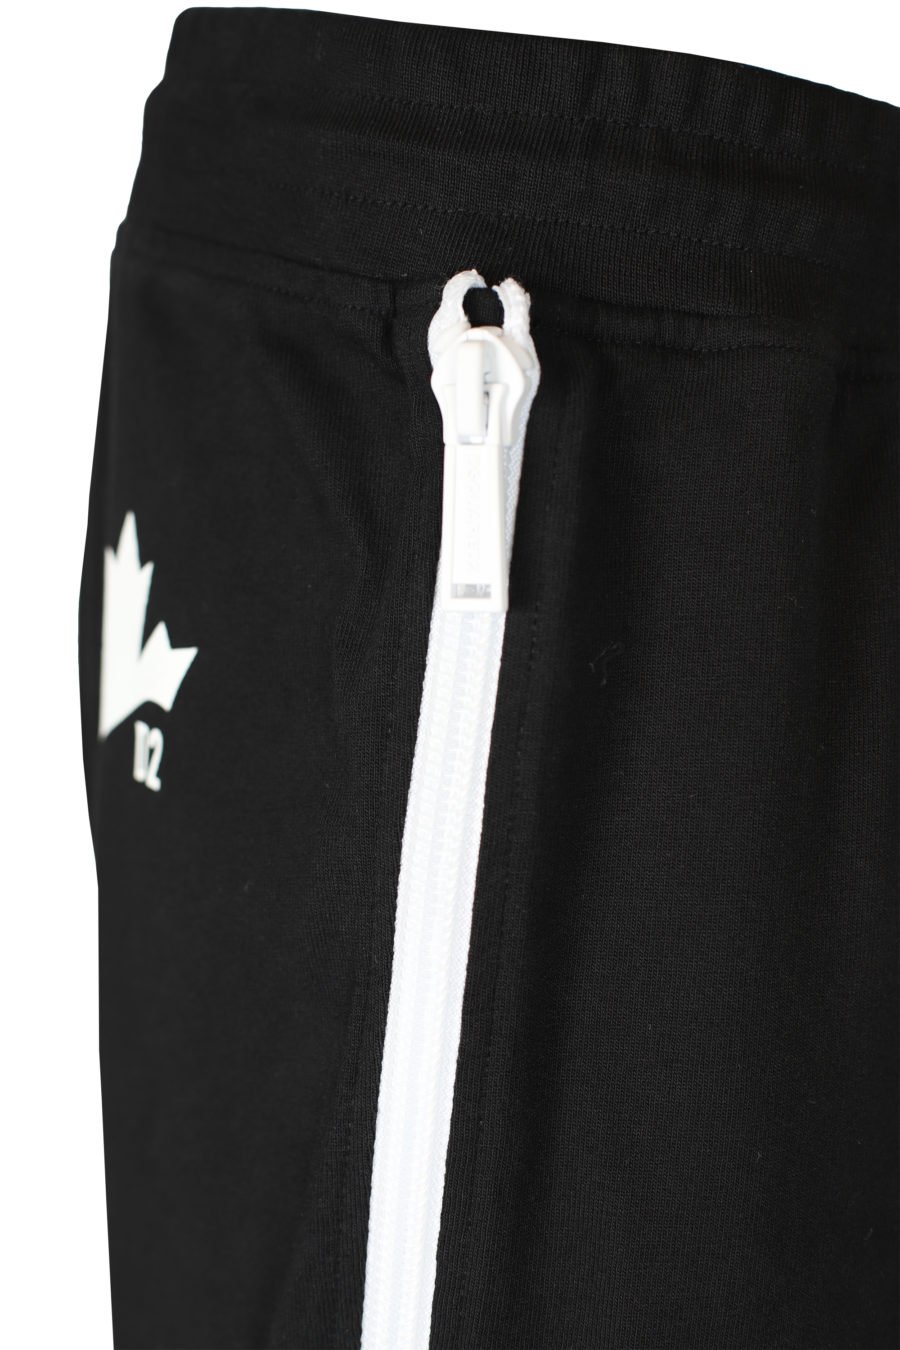 Tracksuit trousers with white zips - IMG 2694